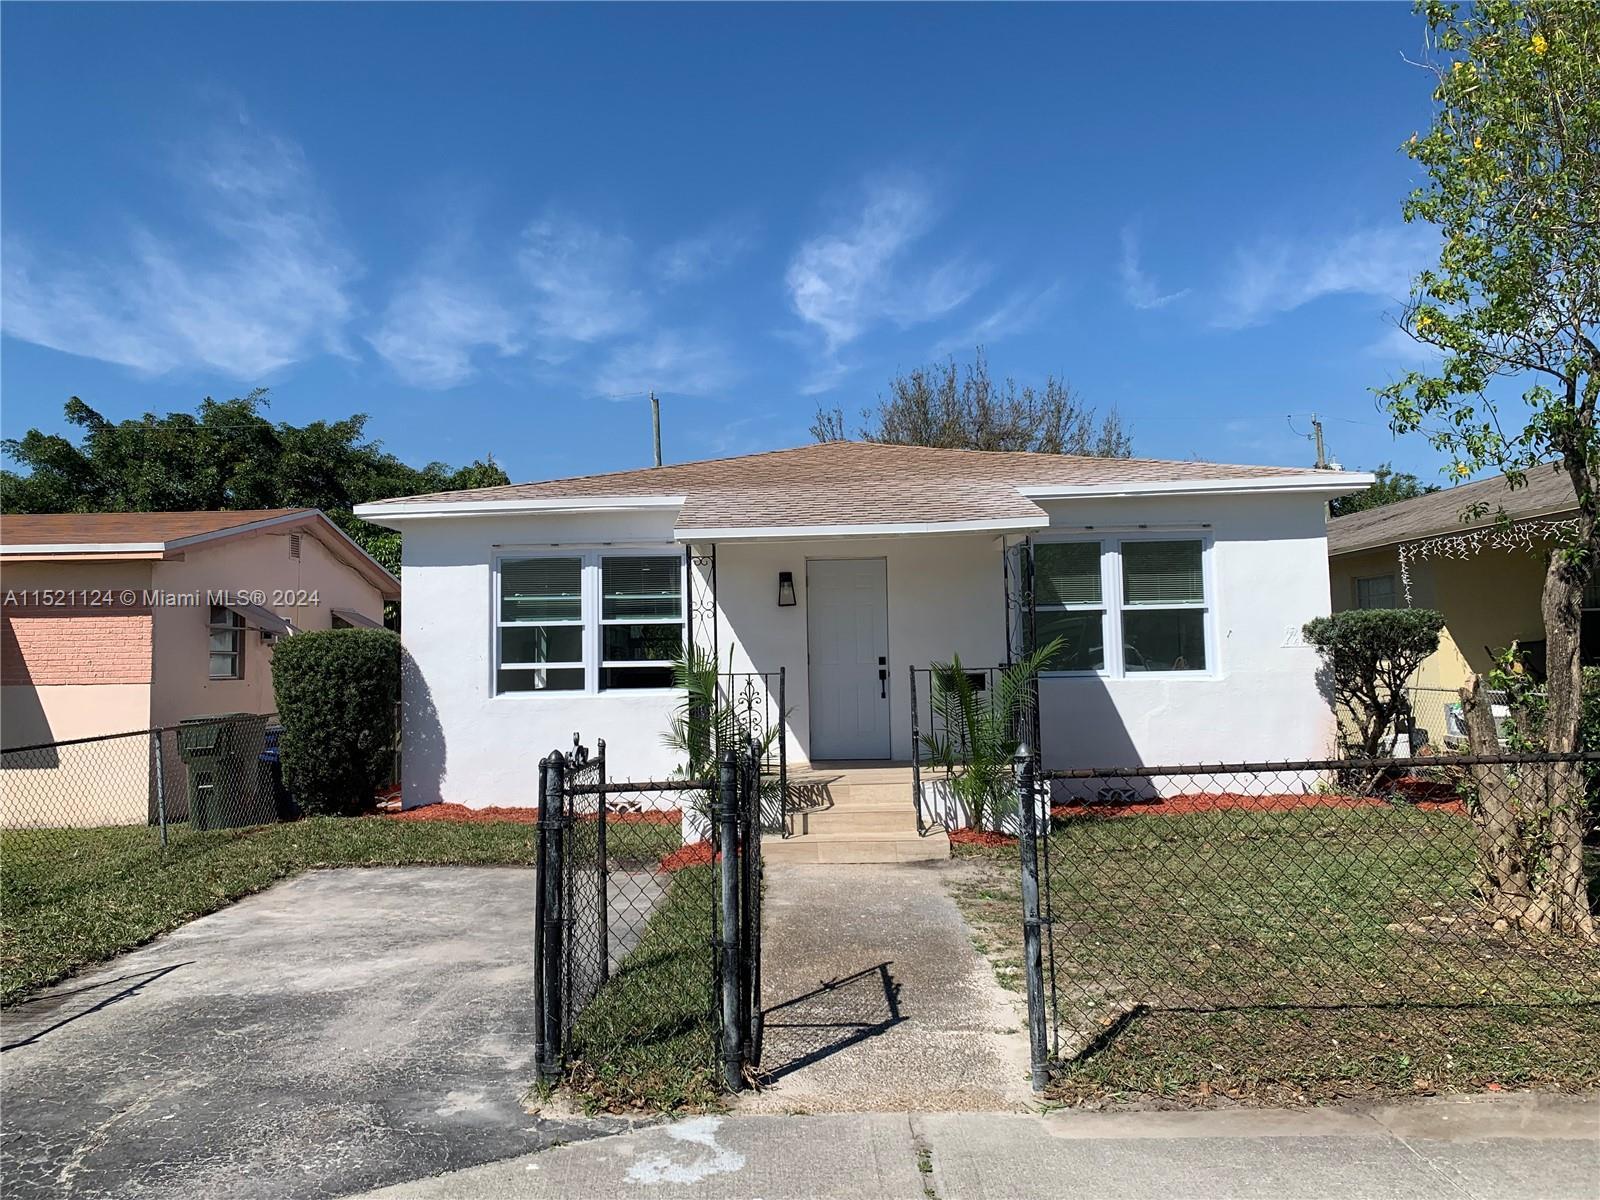 Move-in ready, turn-key Hallandale Beach home. Great location. Close to beaches, shopping, casinos, 